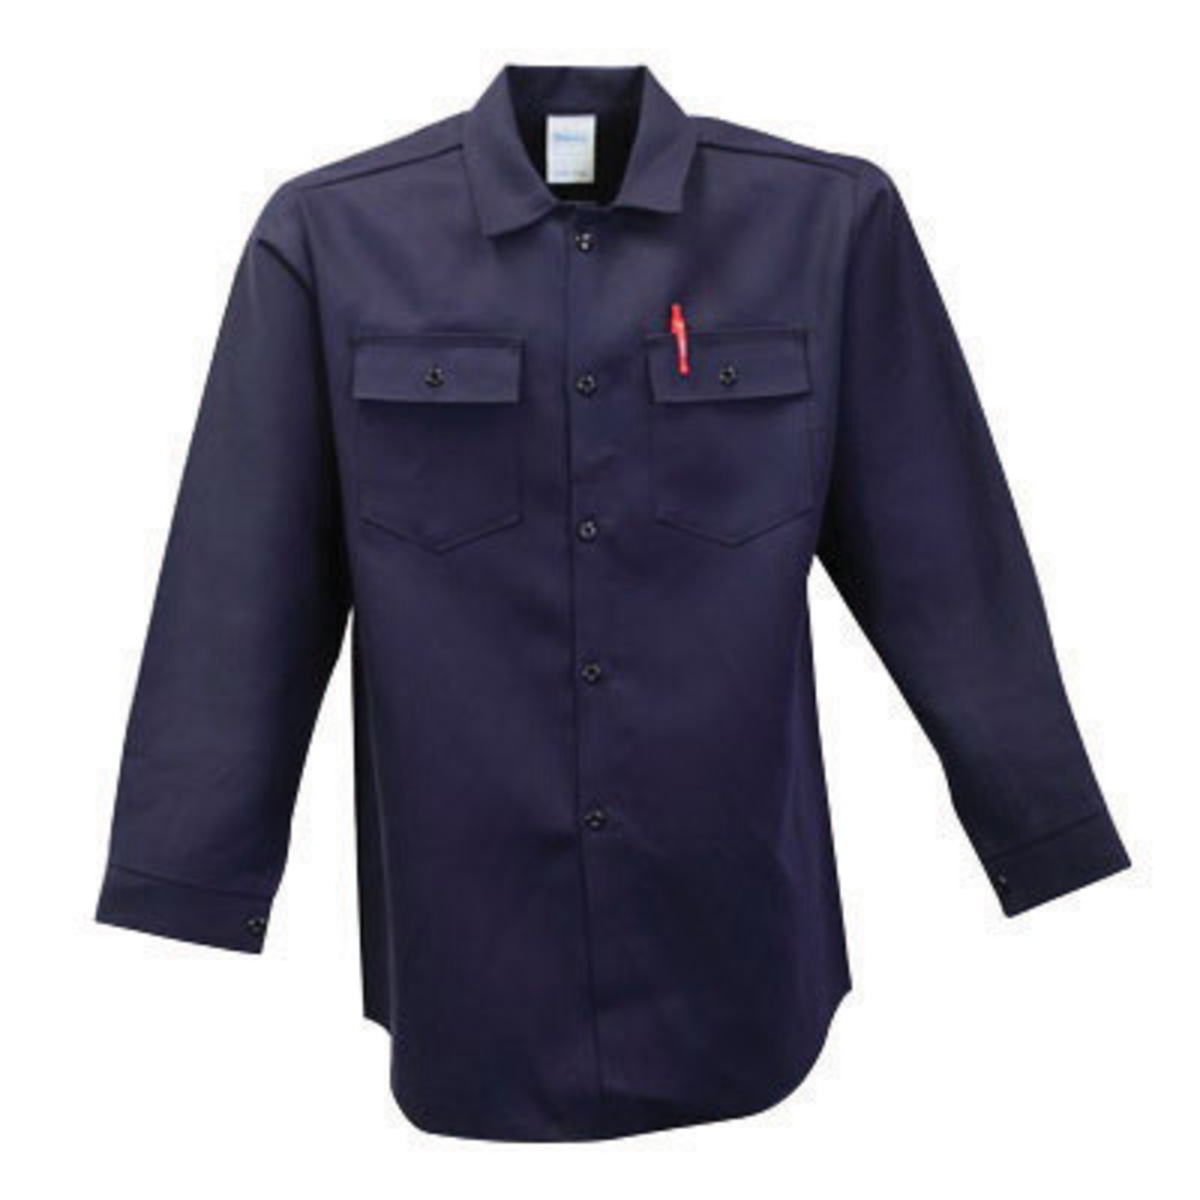 Stanco Safety Products™ Size 3X Navy Blue Indura® Arc Rated Flame Resistant Work Shirt With Button Closure